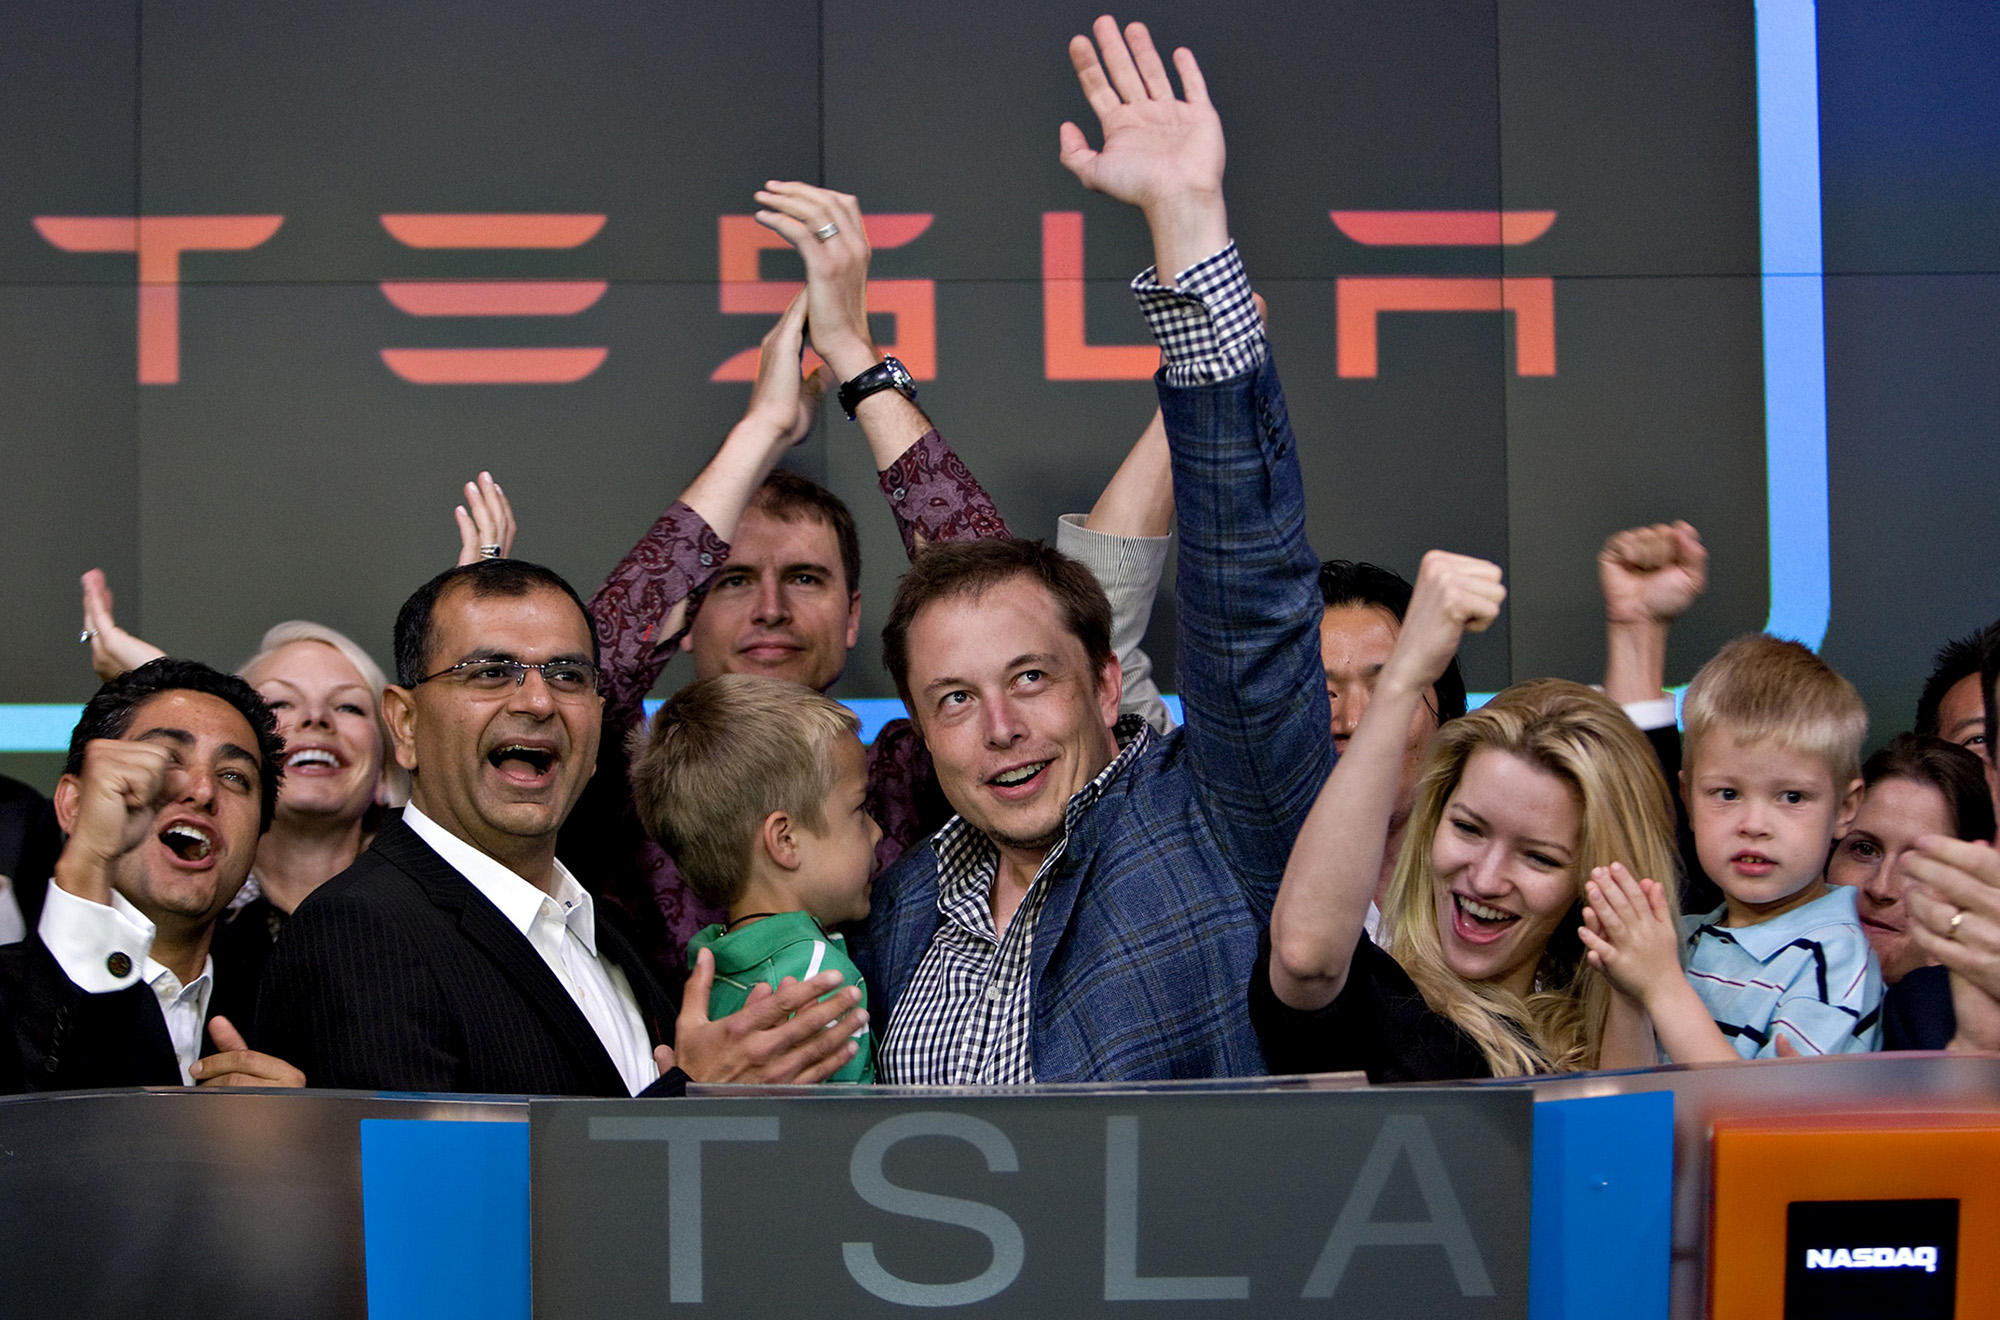 Elon Musk, center, participates in the Nasdaq opening bell ceremony in New York in 2010.